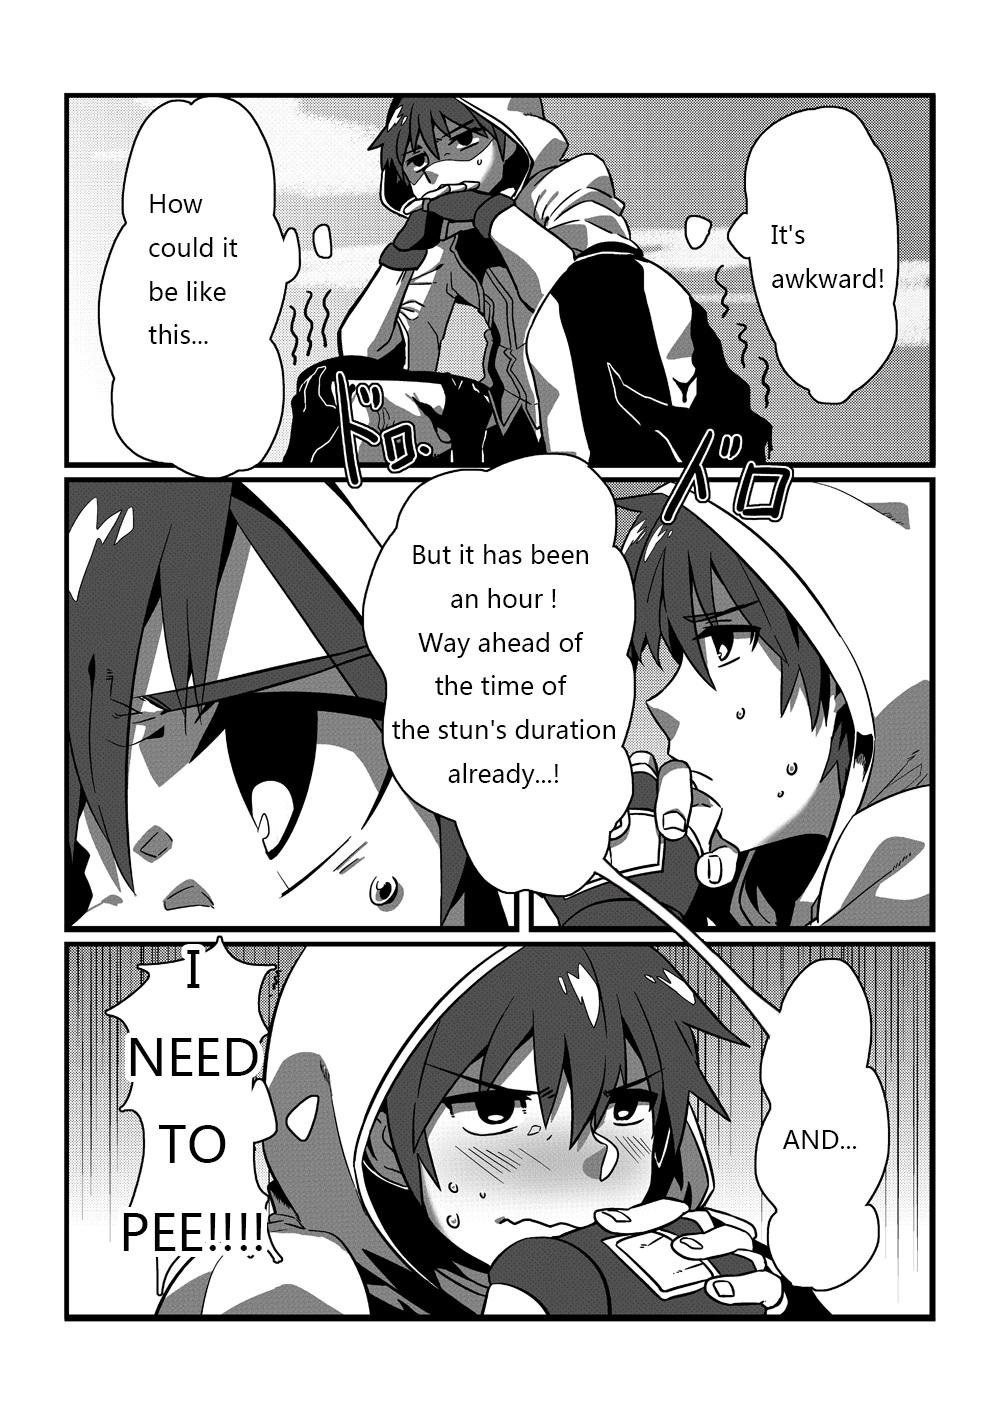 With Shintou - PENETRATION - Dungeon fighter online Uncensored - Page 5